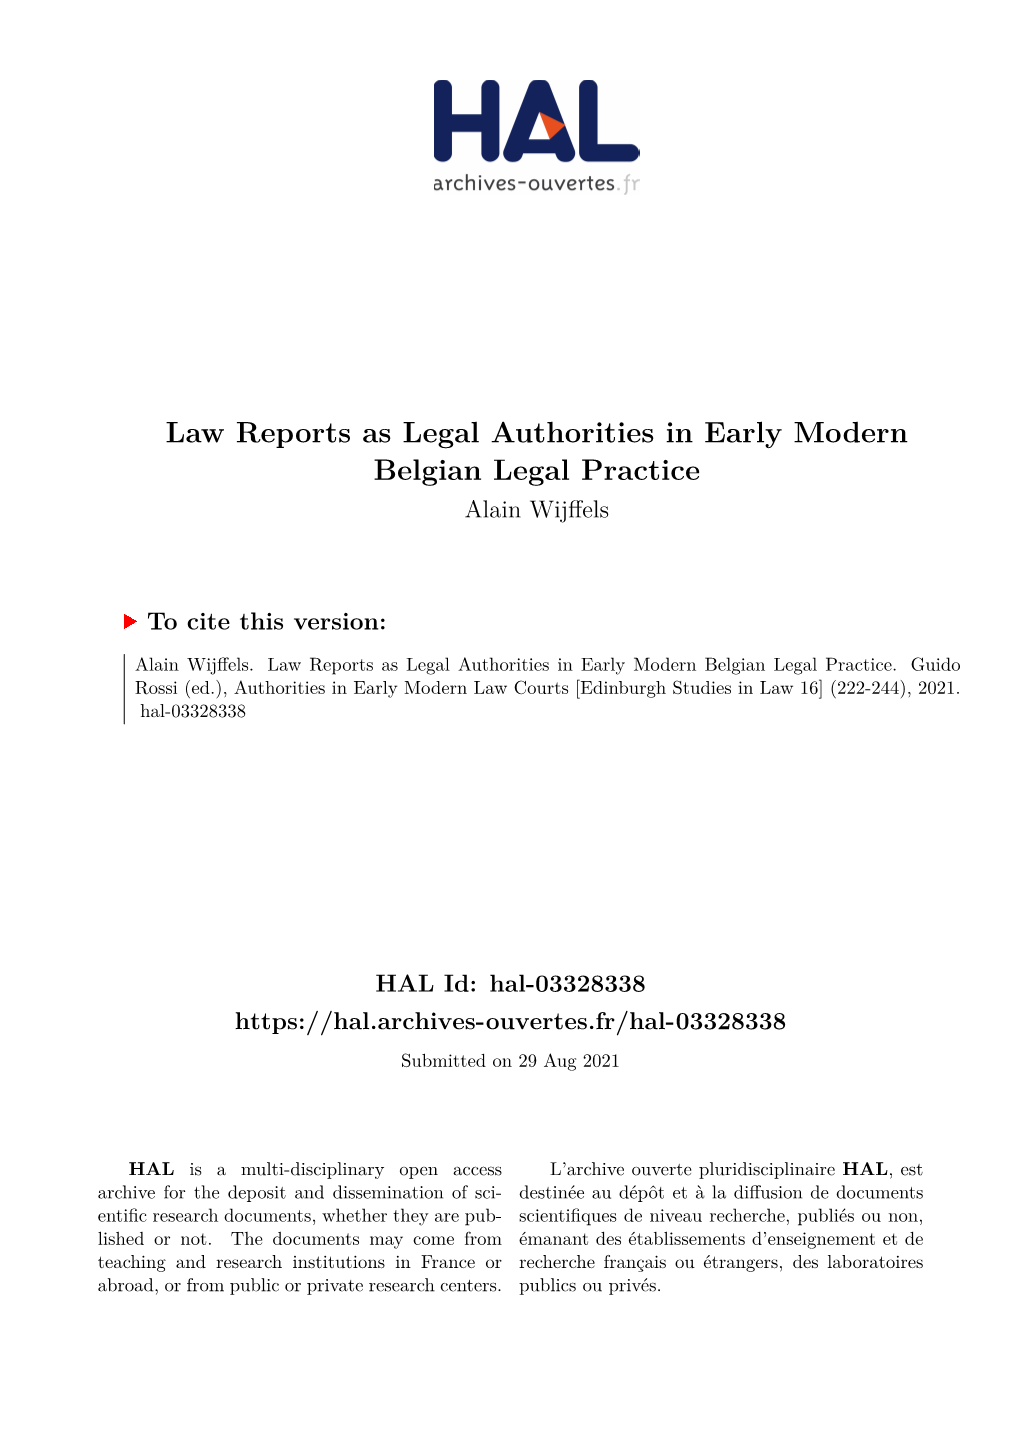 Law Reports As Legal Authorities in Early Modern Belgian Legal Practice Alain Wijffels